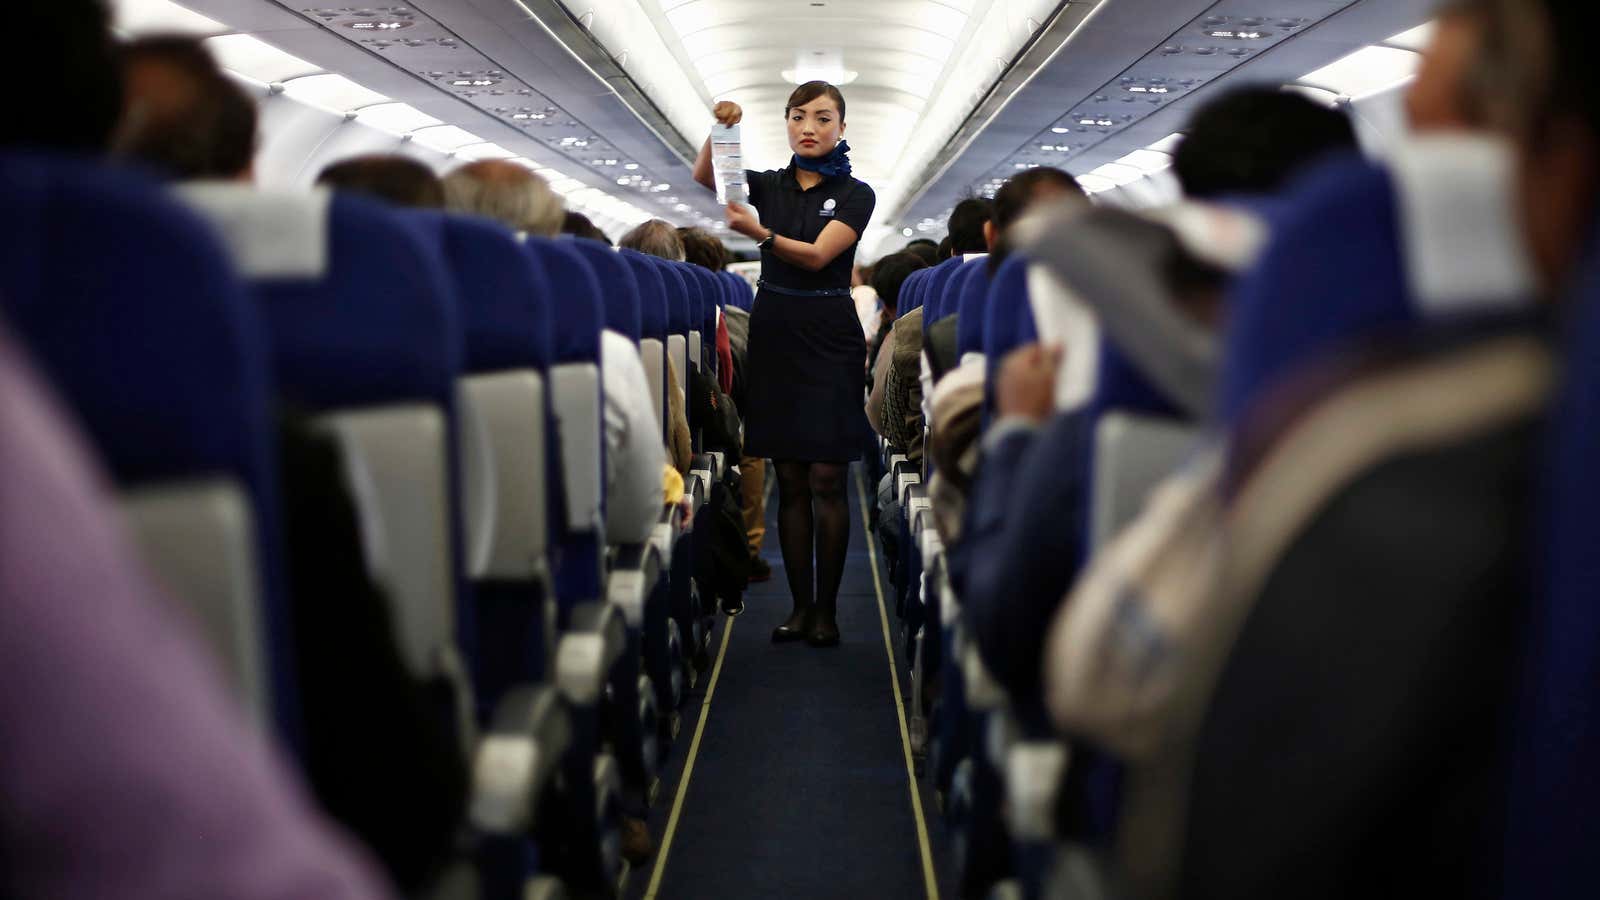 What are the health risks of ultra-long-haul flights?